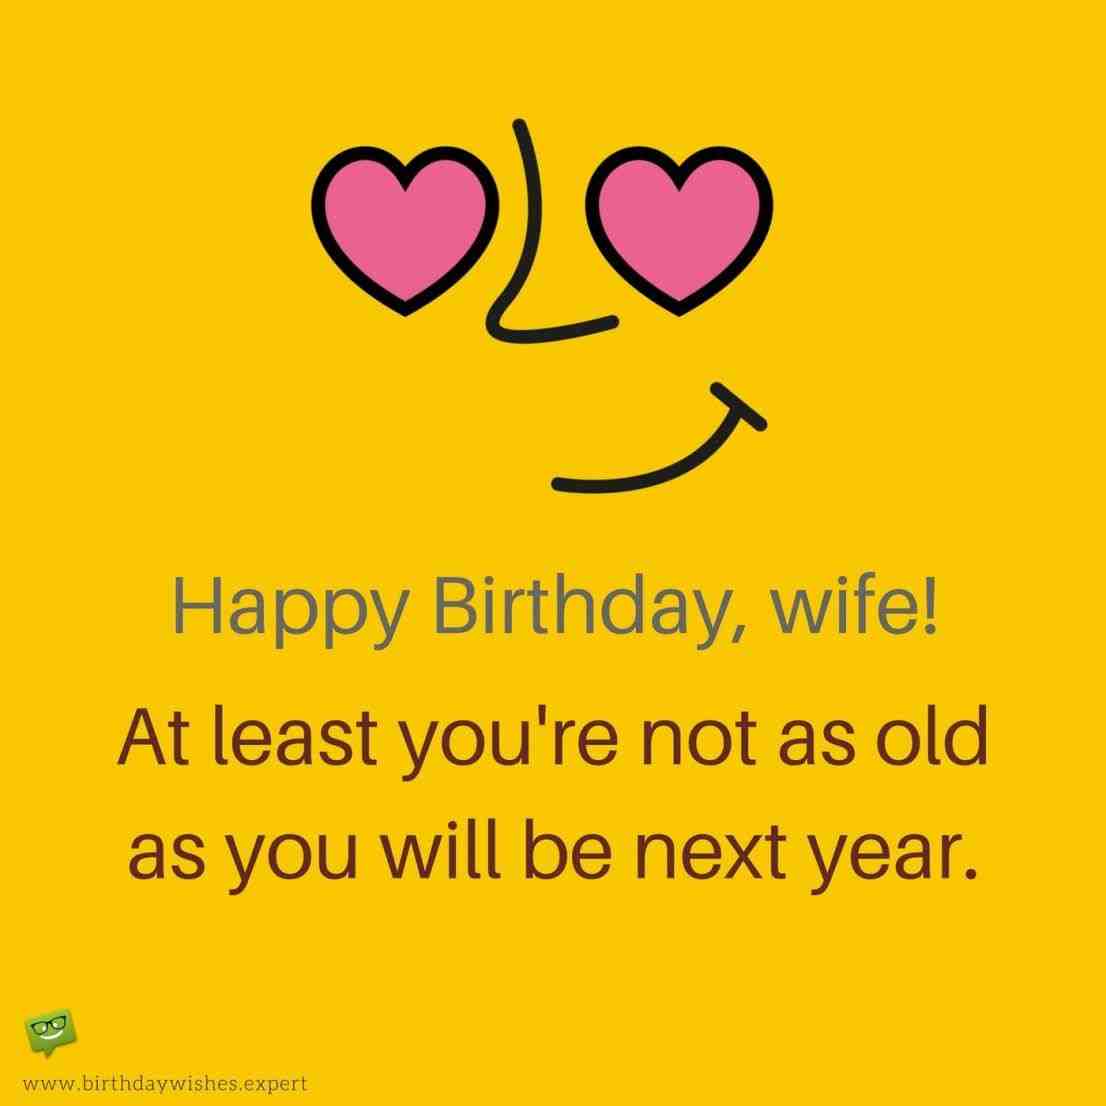 download-quotes-hd-wallpapers-pinterest-rhpinterestcom-funny-birthday